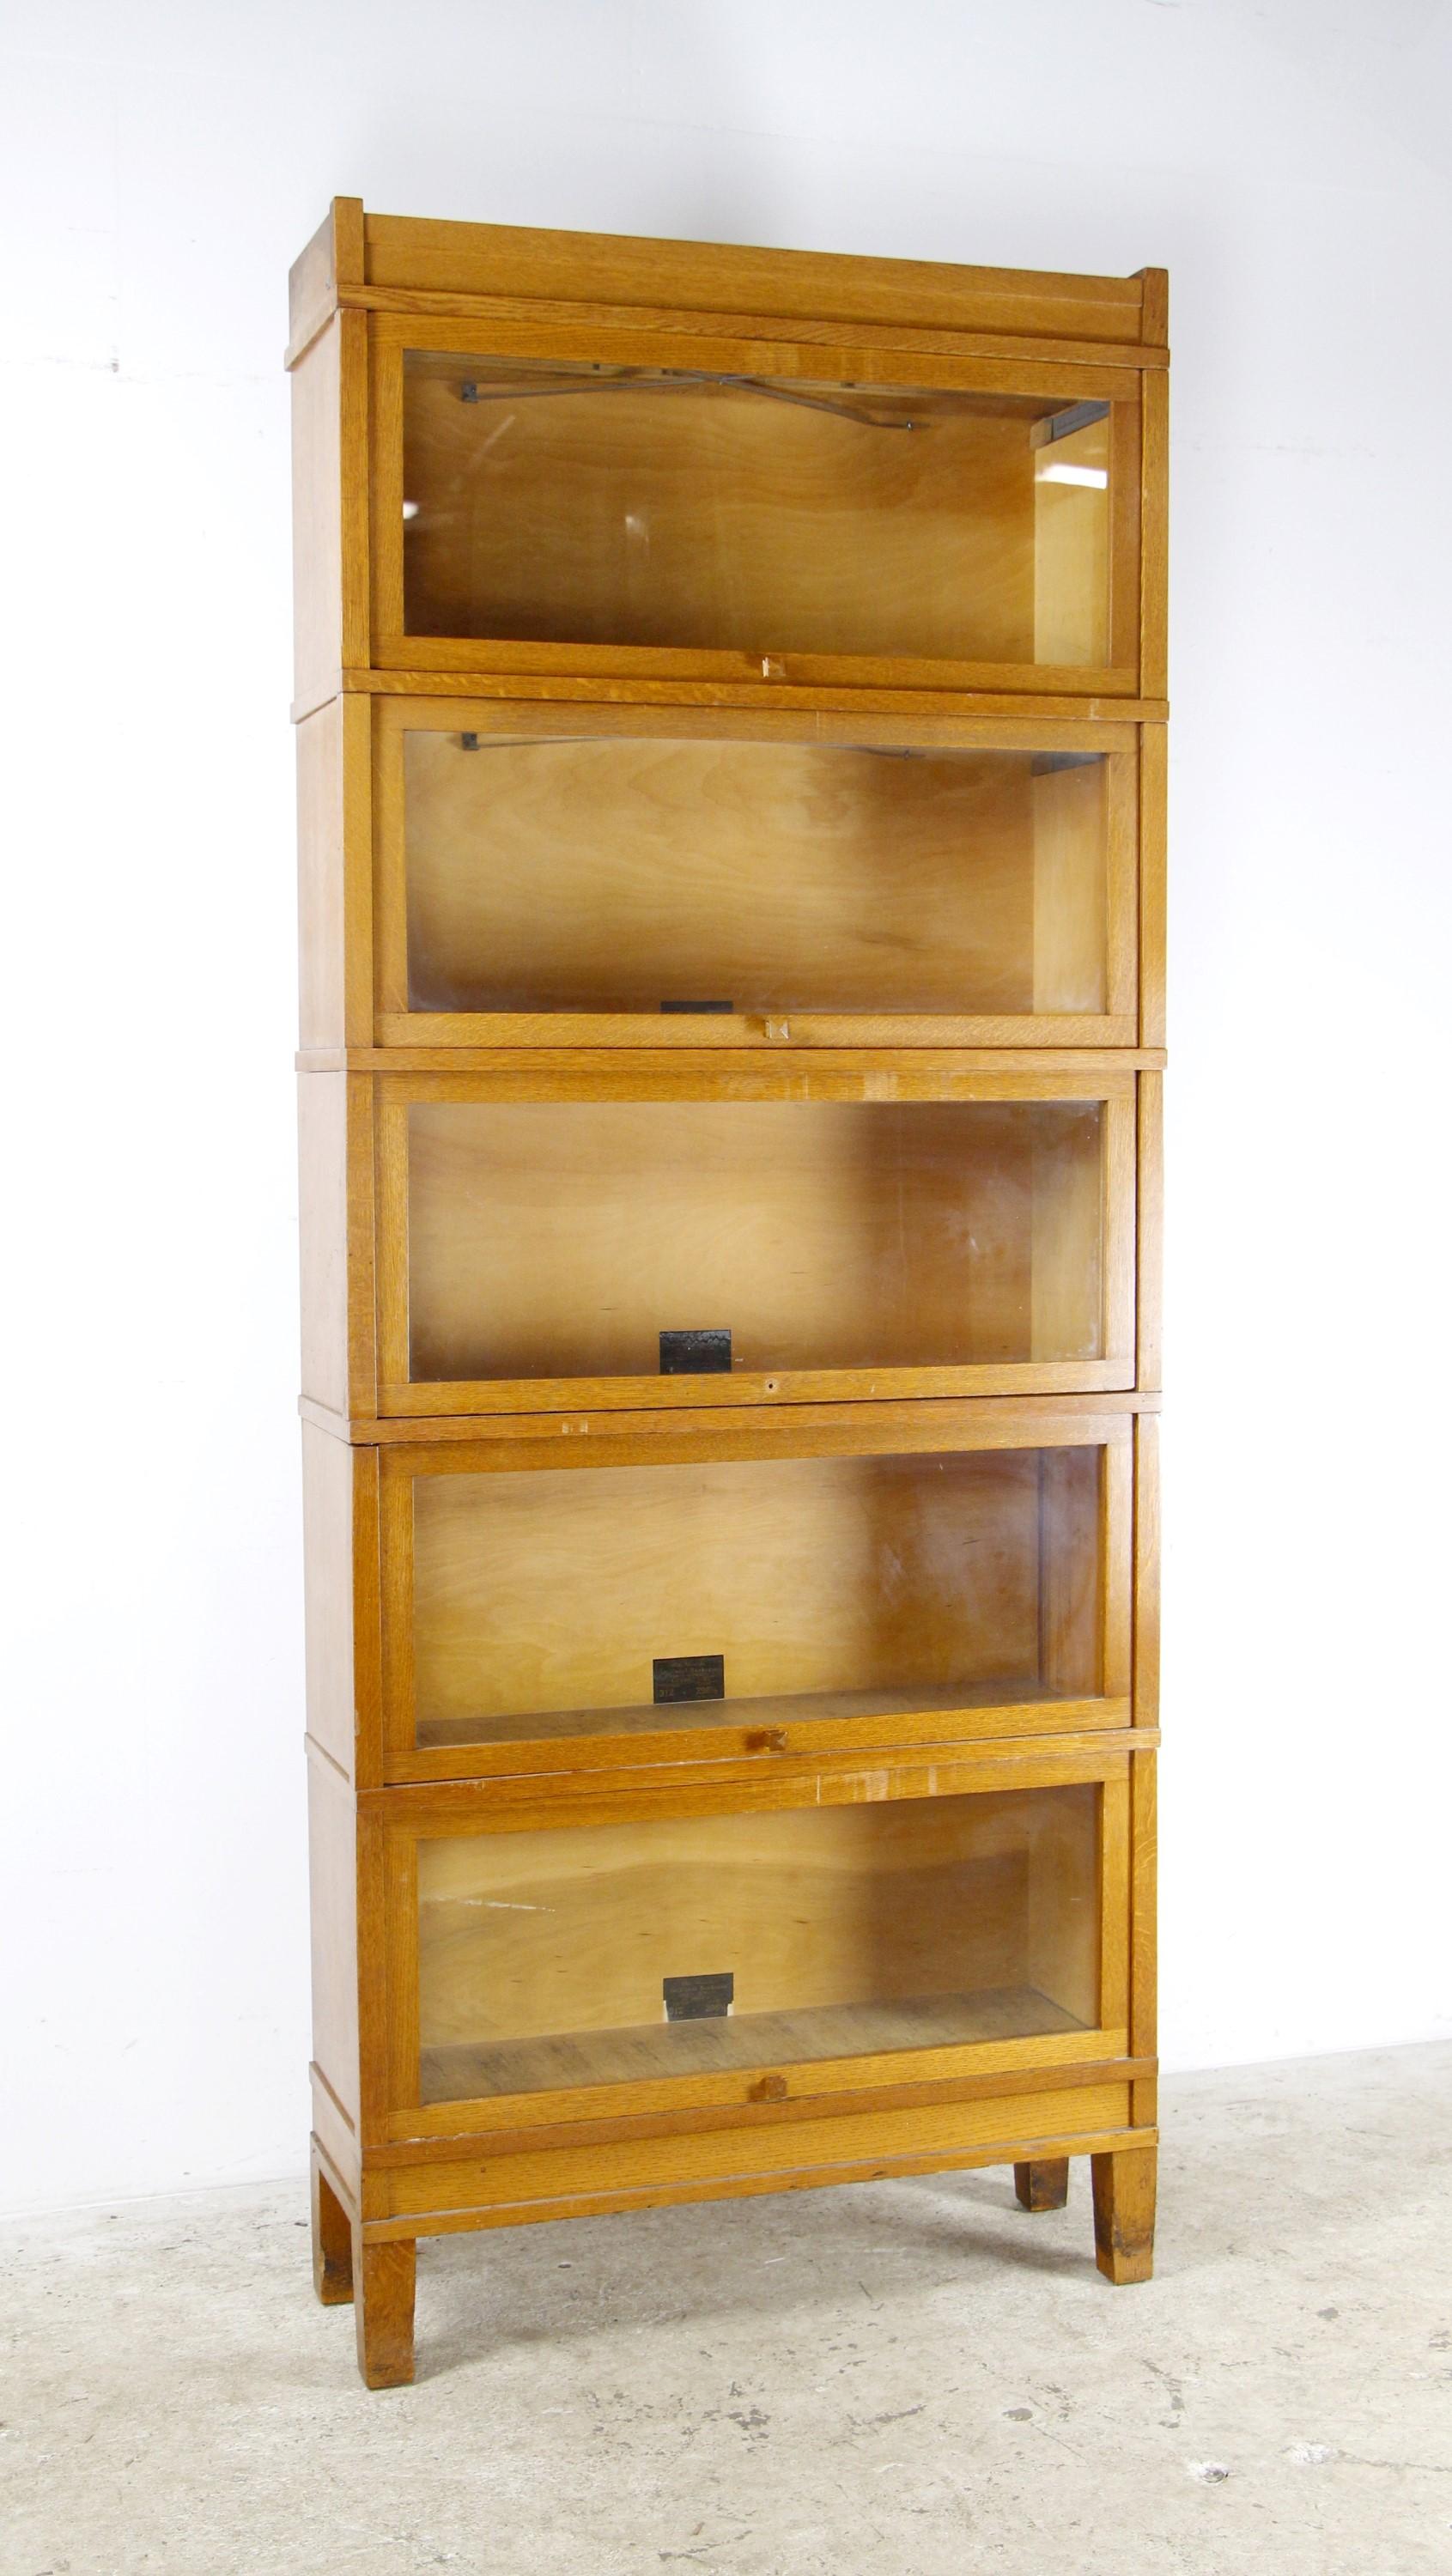 Globe-Wernicke Sectional Bookcase, Pattern 3-1/2 - Grade 298-1/2.  This oak five section barrister bookcase has a medium tone with glass front doors.  It includes the original wood door pulls (except for one that is missing).   Please see the